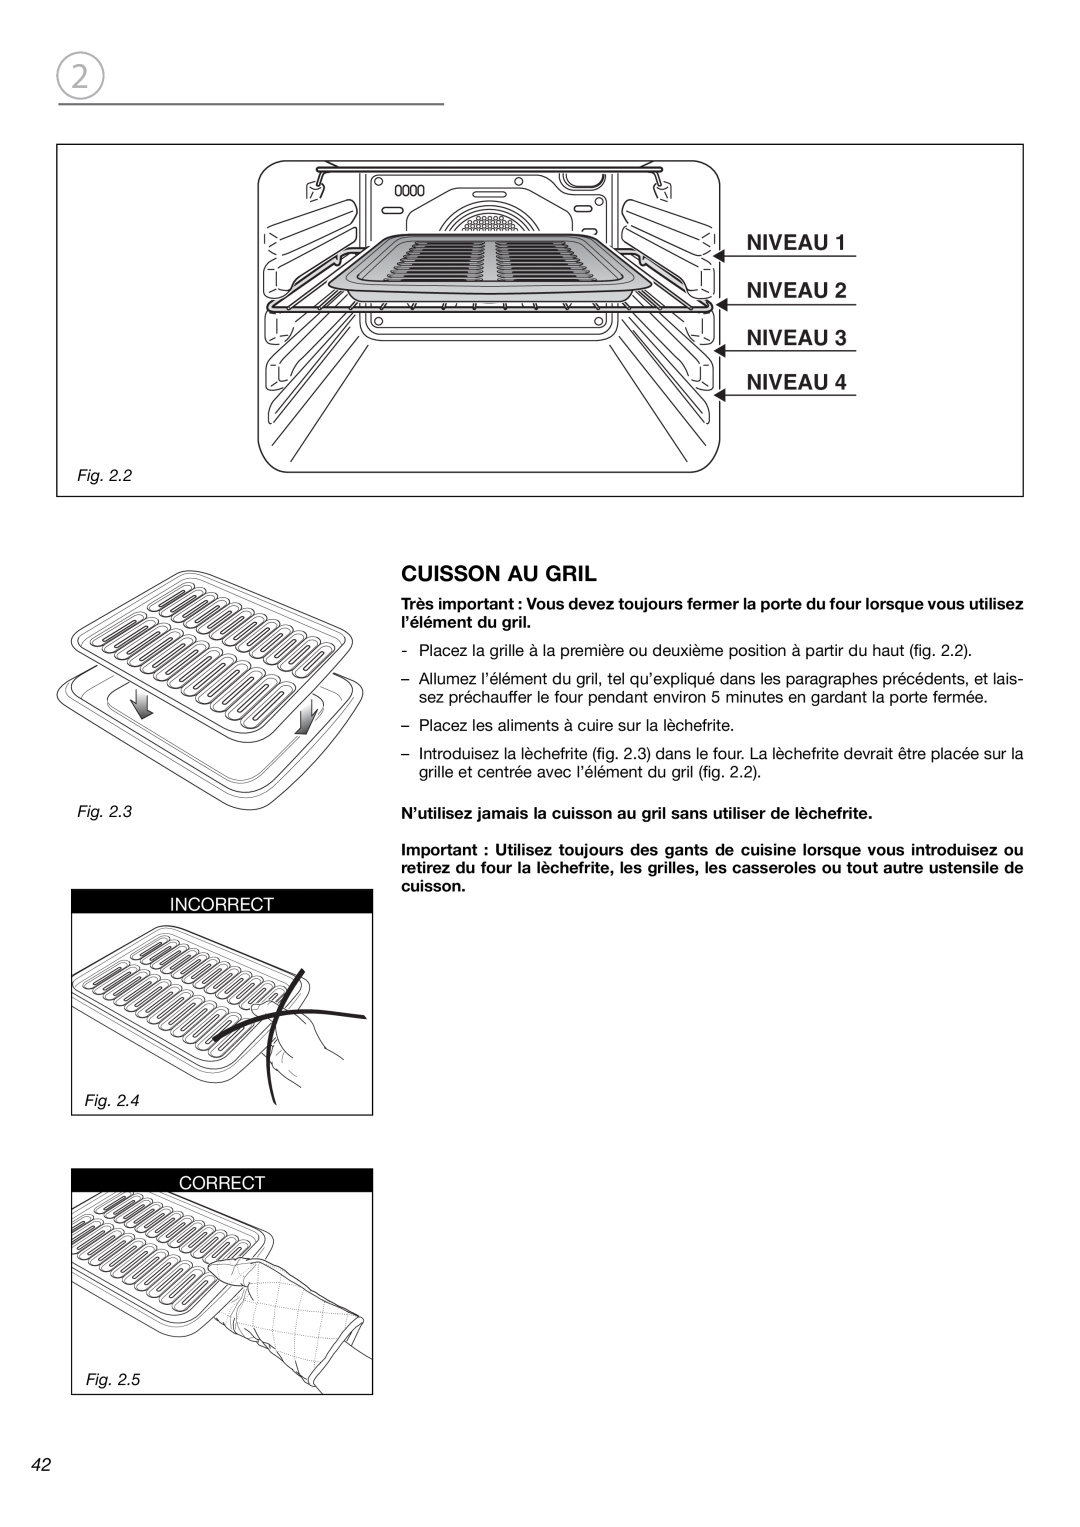 Fisher & Paykel OB24SDPX installation instructions Niveau Niveau Niveau Niveau, Cuisson Au Gril, Incorrect, Correct 